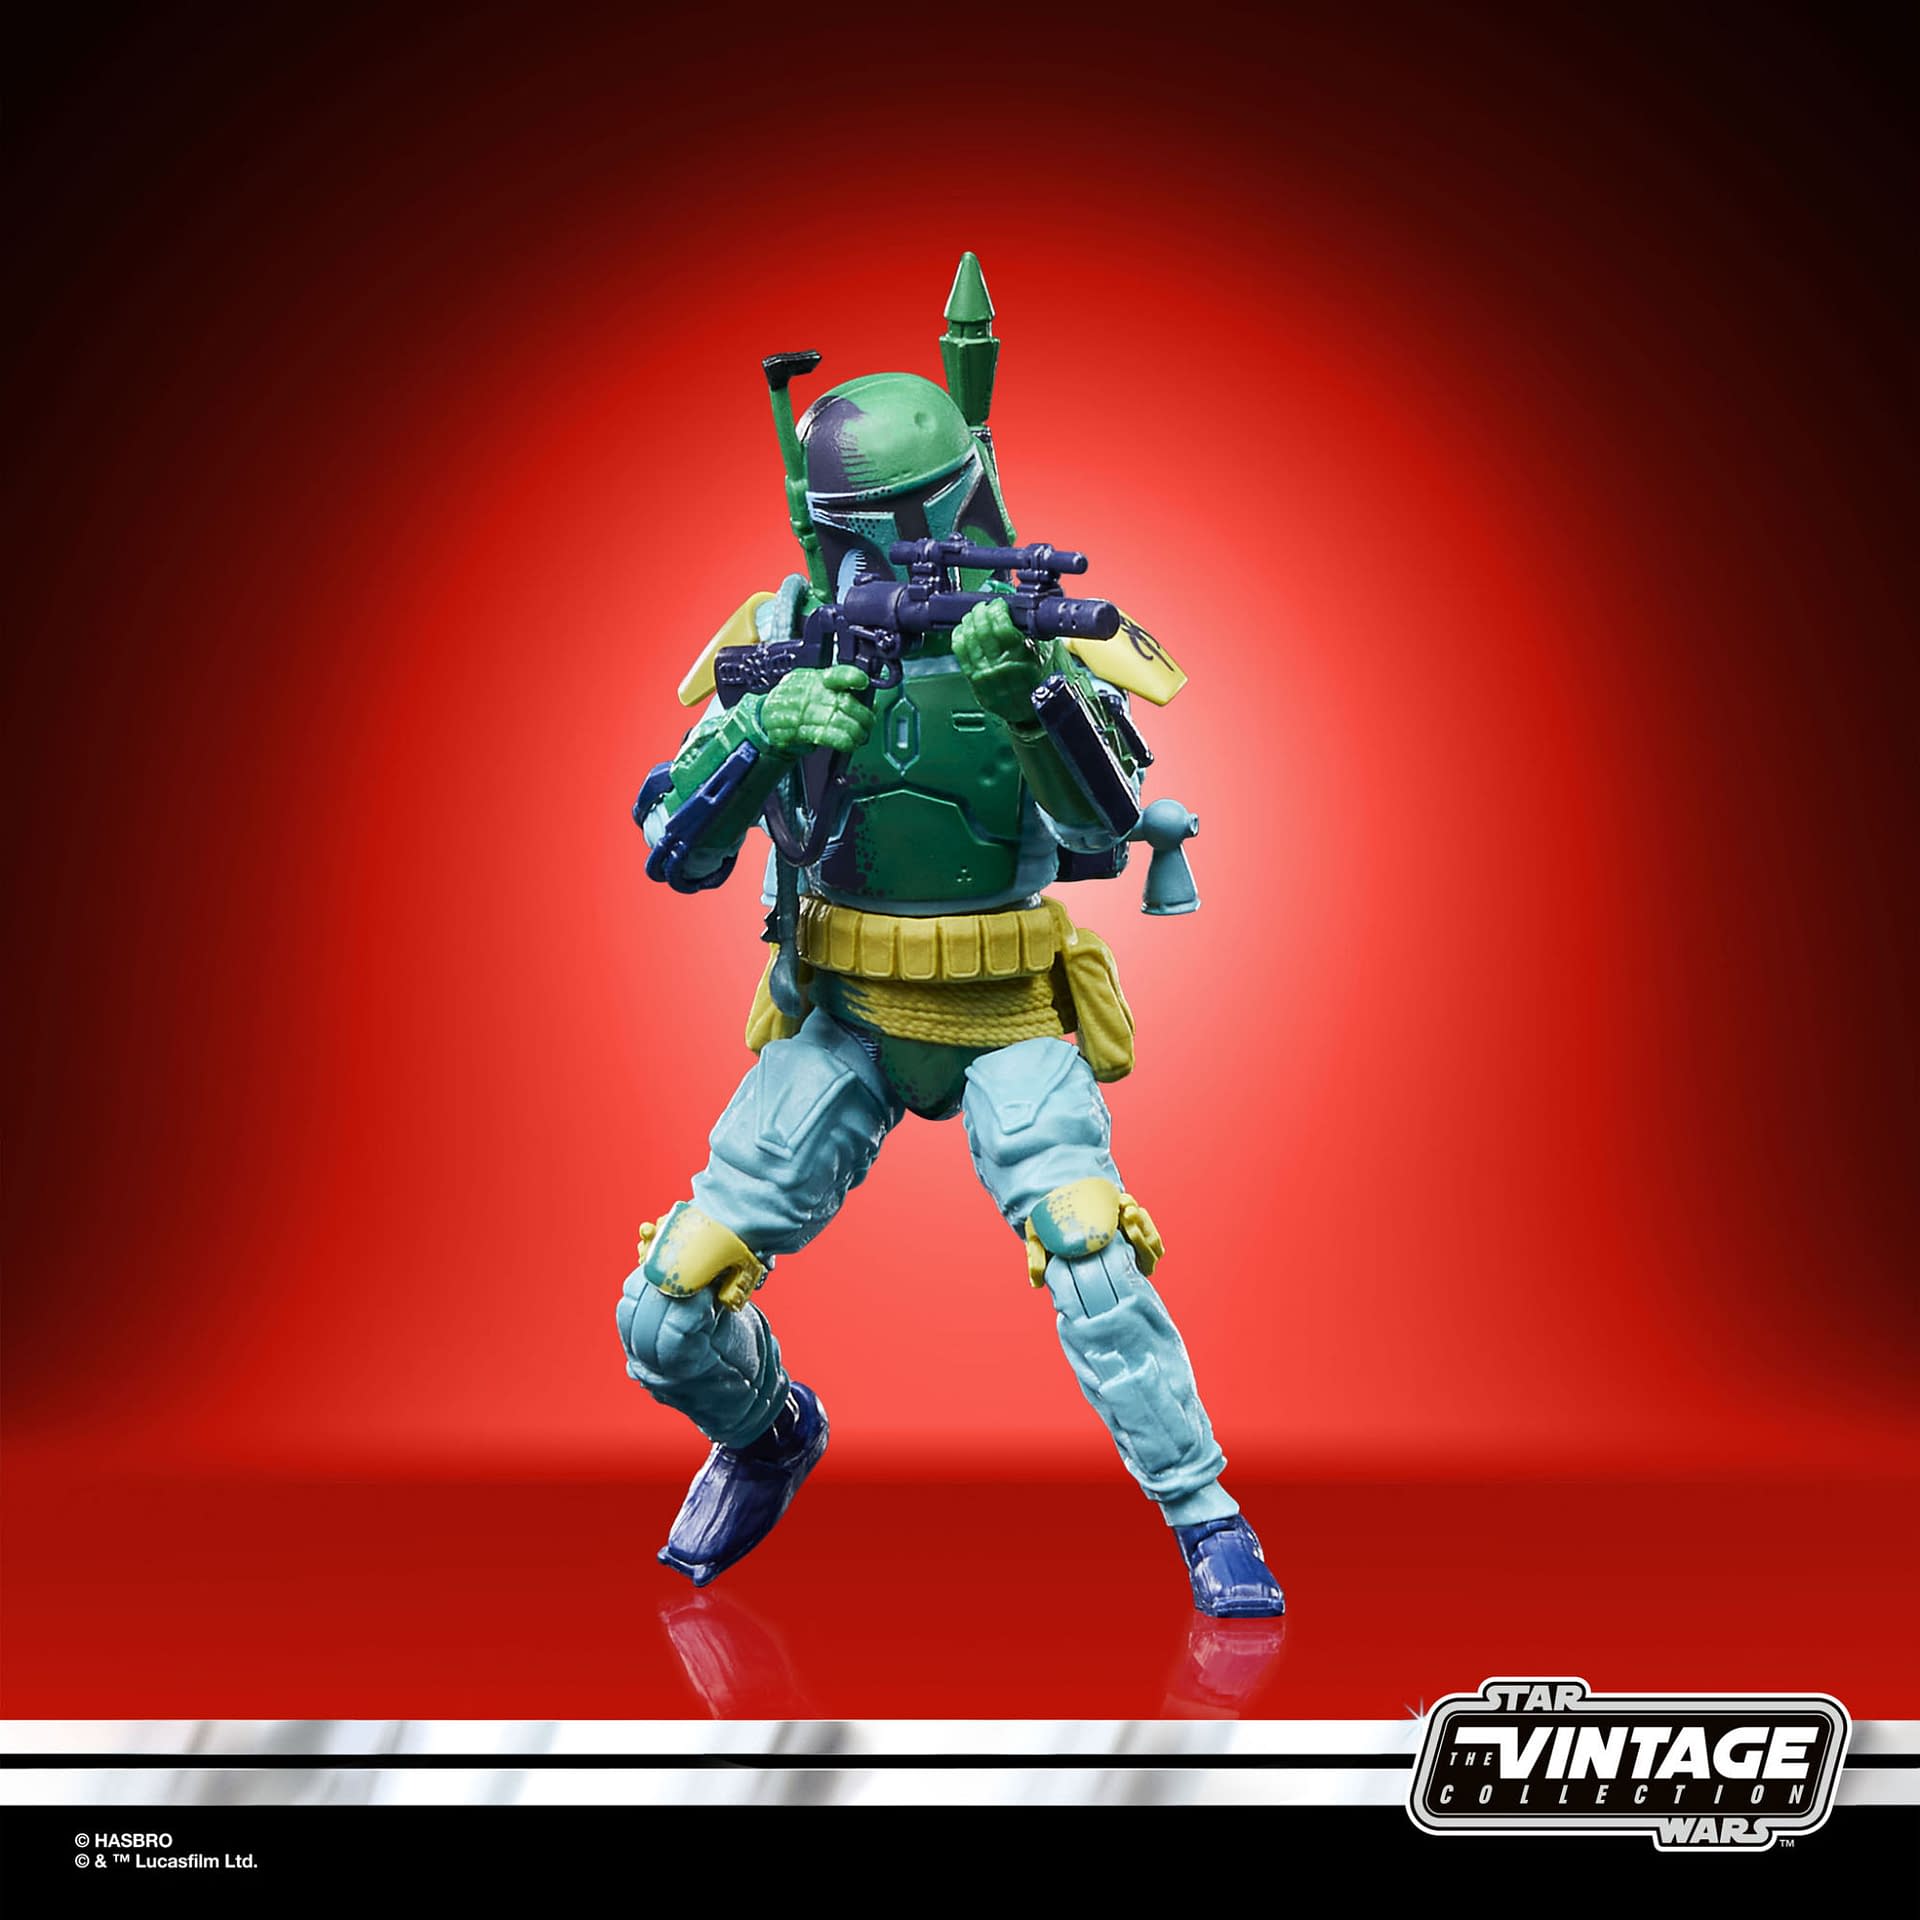 Target Exclusive Star Wars: TVC Boba Fett Gets a $21 Price Tag